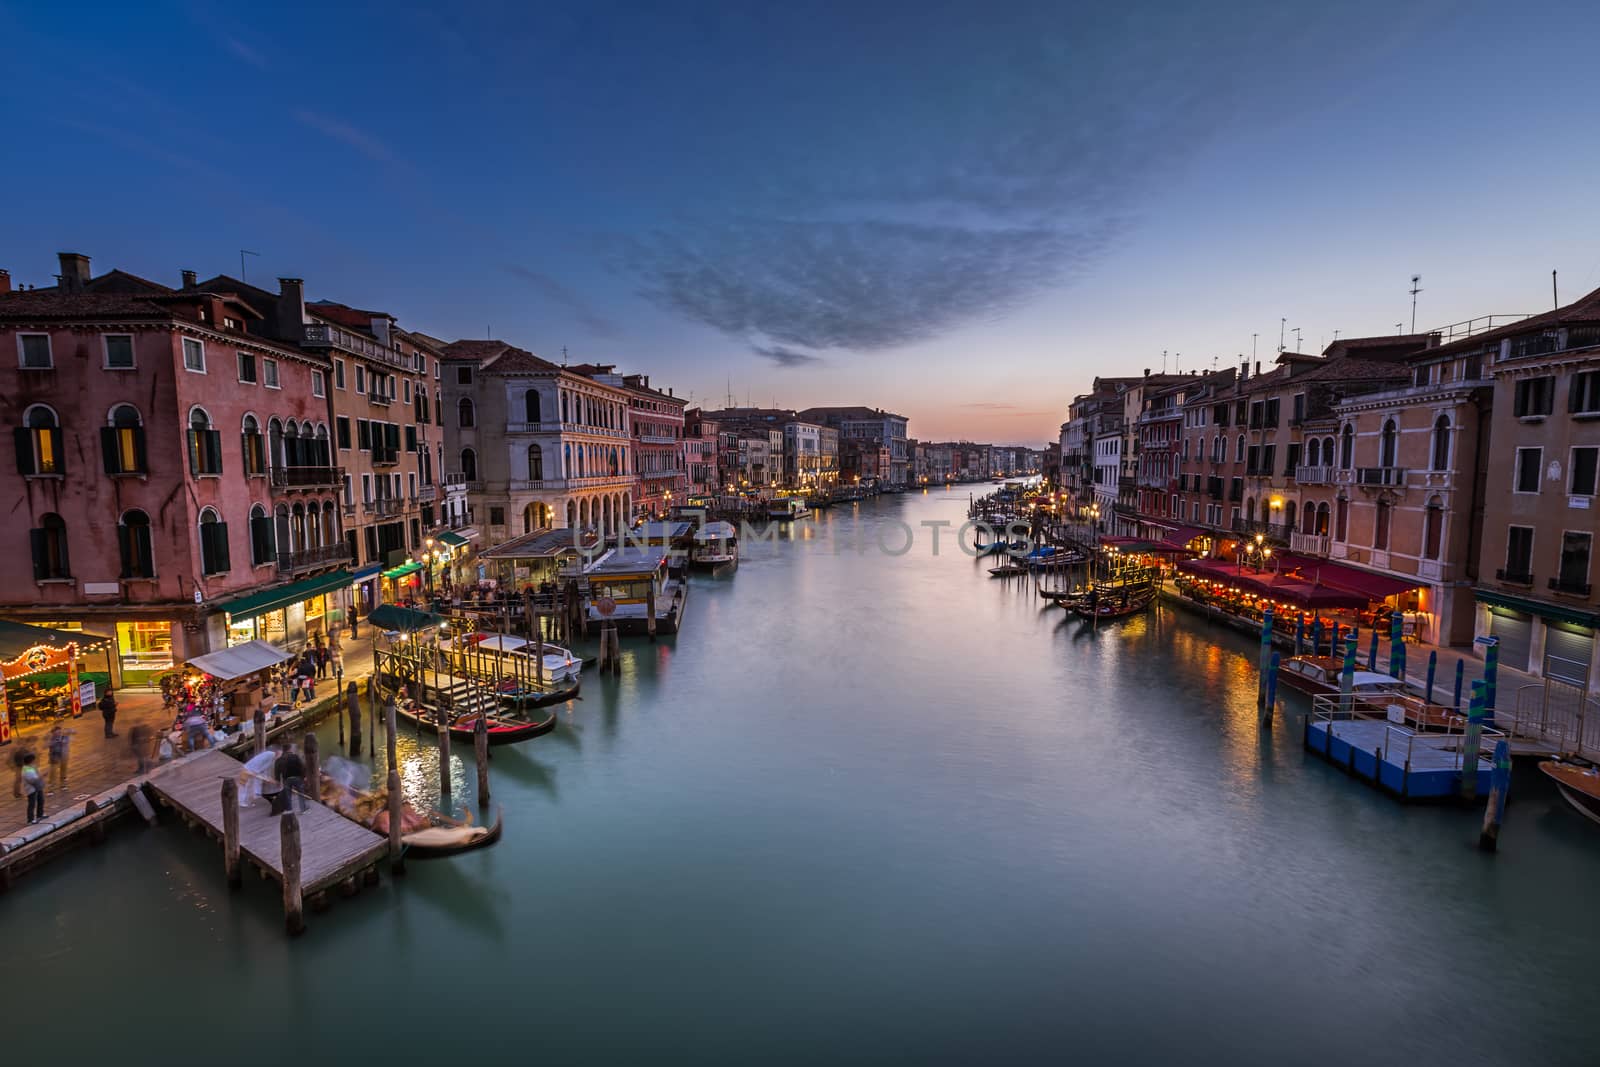 View on Grand Canal from Rialto Bridge, Venice, Italy by anshar